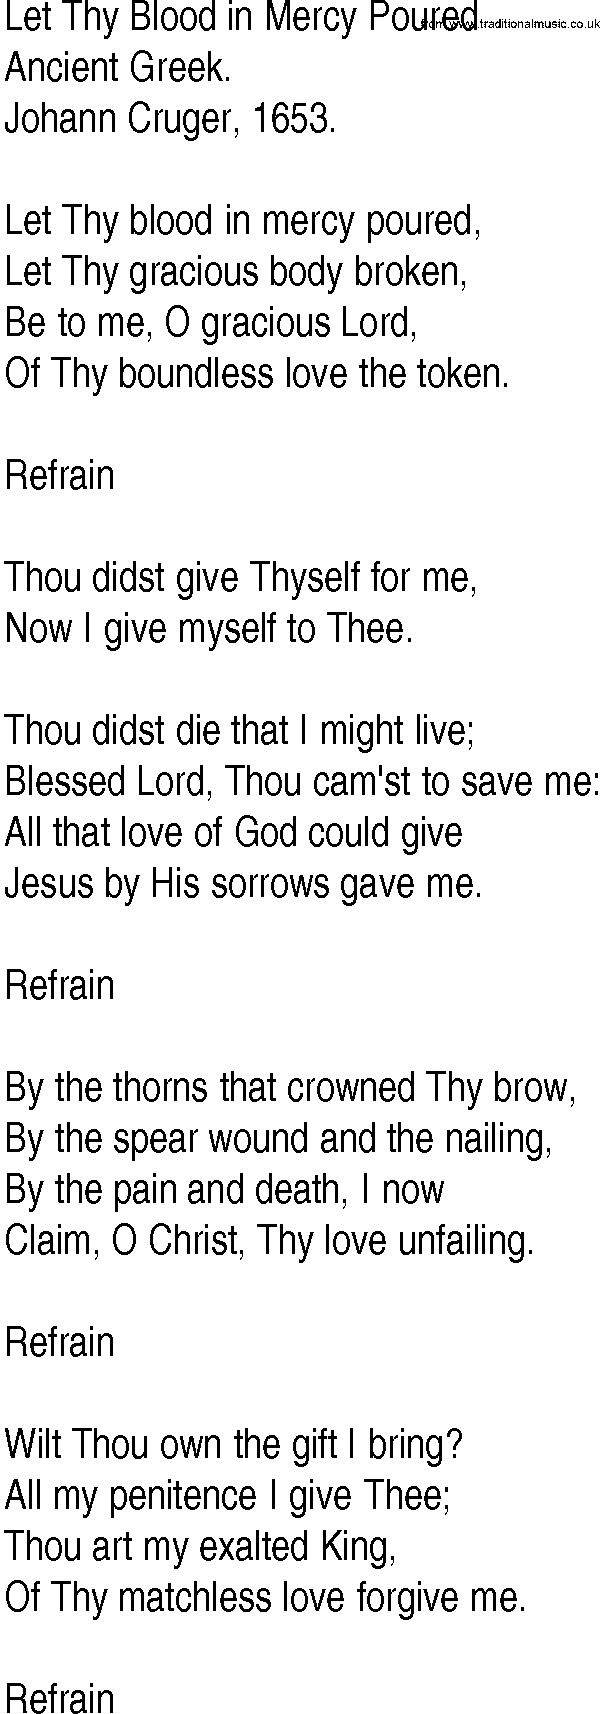 Hymn and Gospel Song: Let Thy Blood in Mercy Poured by Ancient Greek lyrics